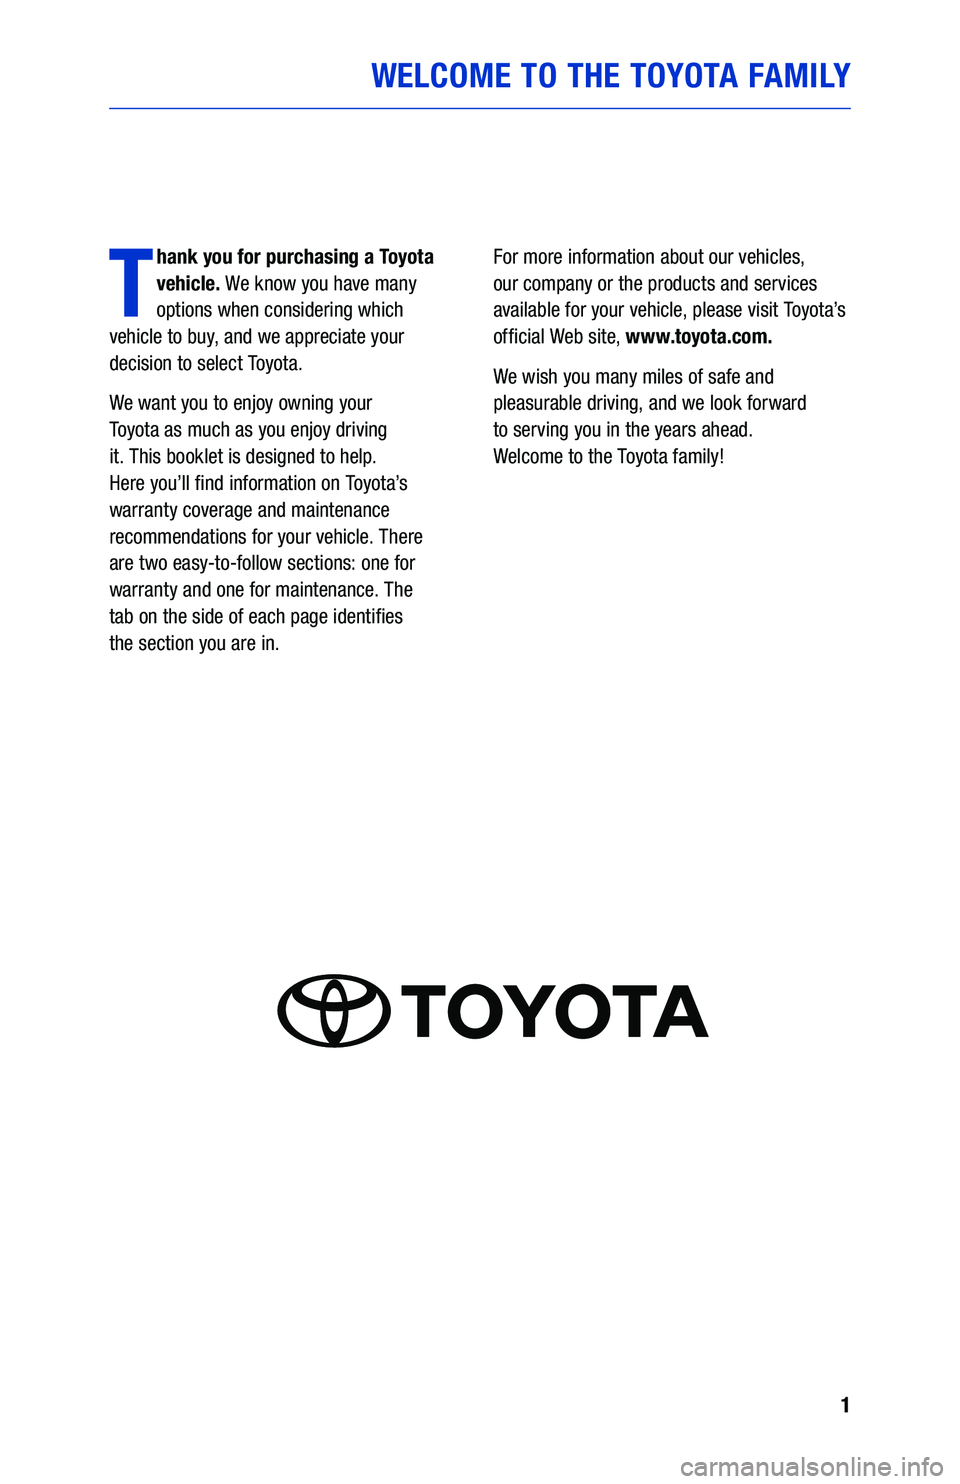 TOYOTA PRIUS C 2019  Warranties & Maintenance Guides (in English) 1
WELCOME TO THE TOYOTA FAMILY
T
hank you for purchasing a Toyota 
vehicle. We know you have many 
options when considering which   
vehicle to buy, and we appreciate your 
decision to select Toyota.
